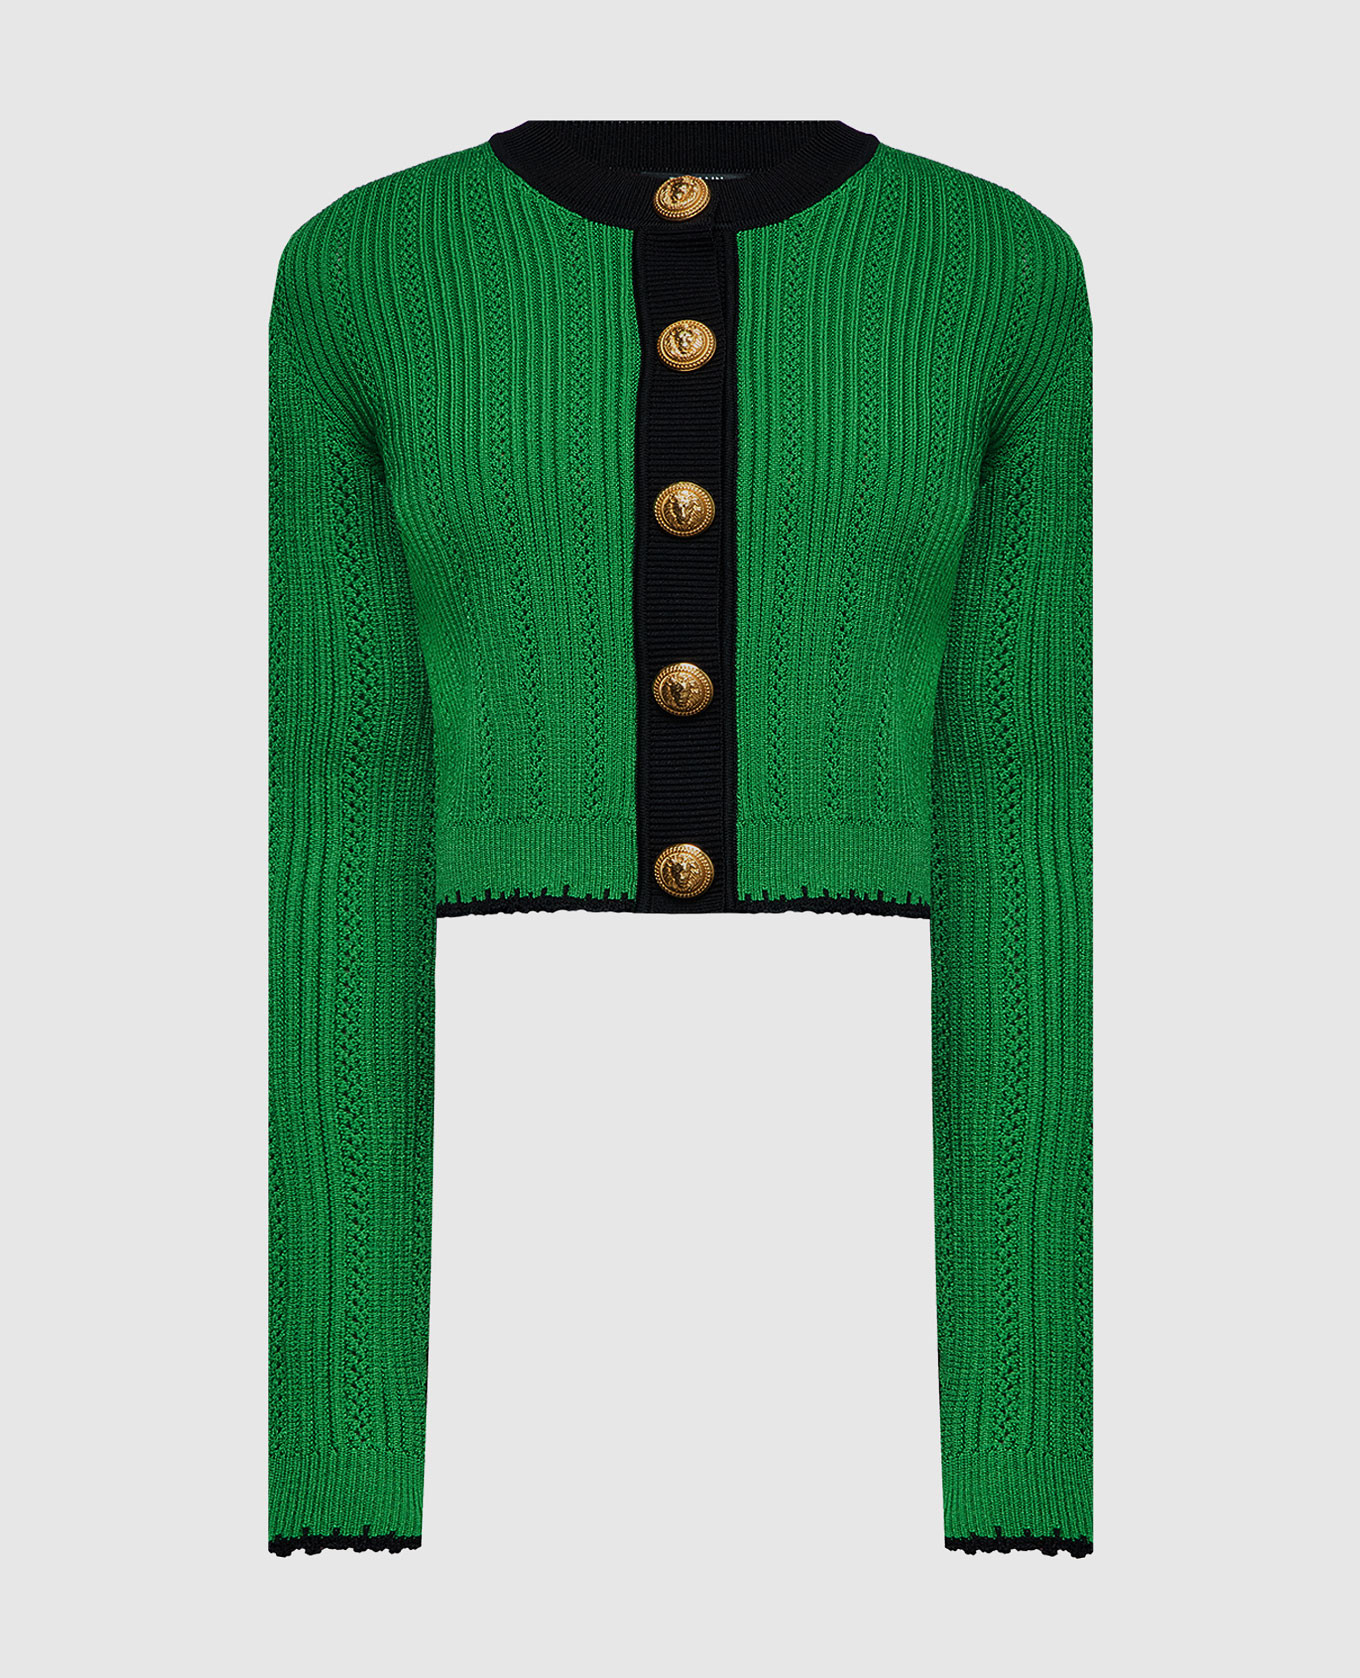 Green cardigan in a textured pattern